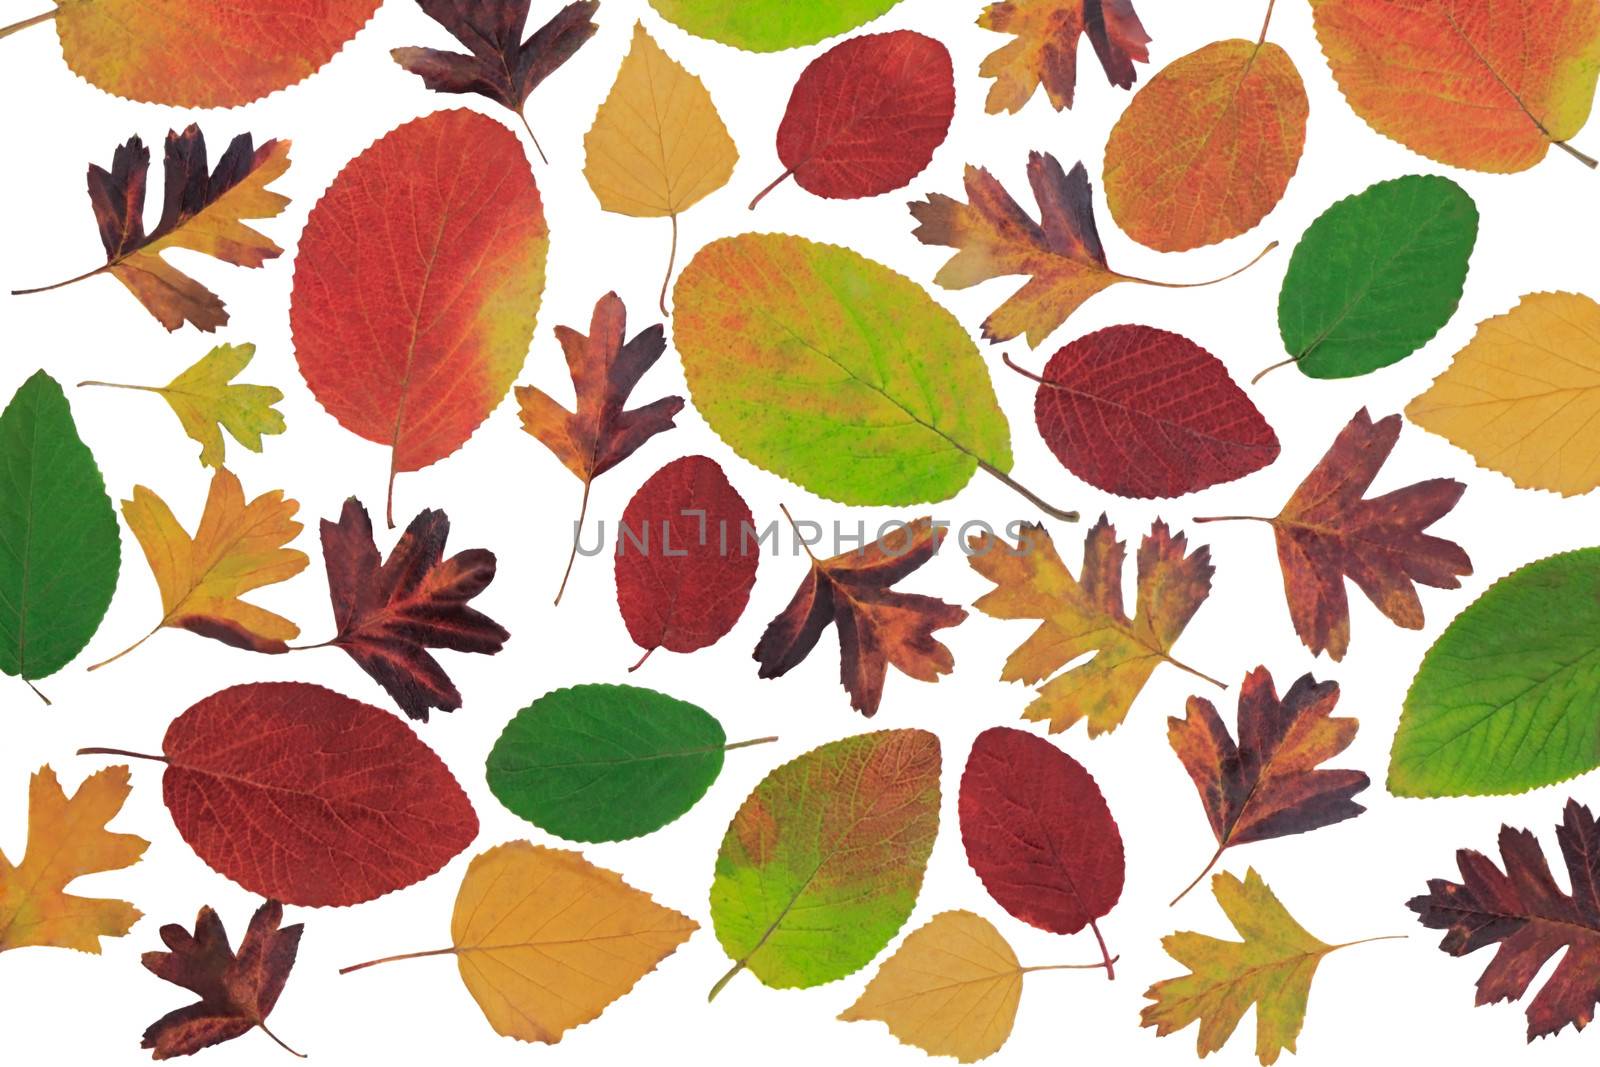 Autumn leaves with different trees on a white background. by georgina198